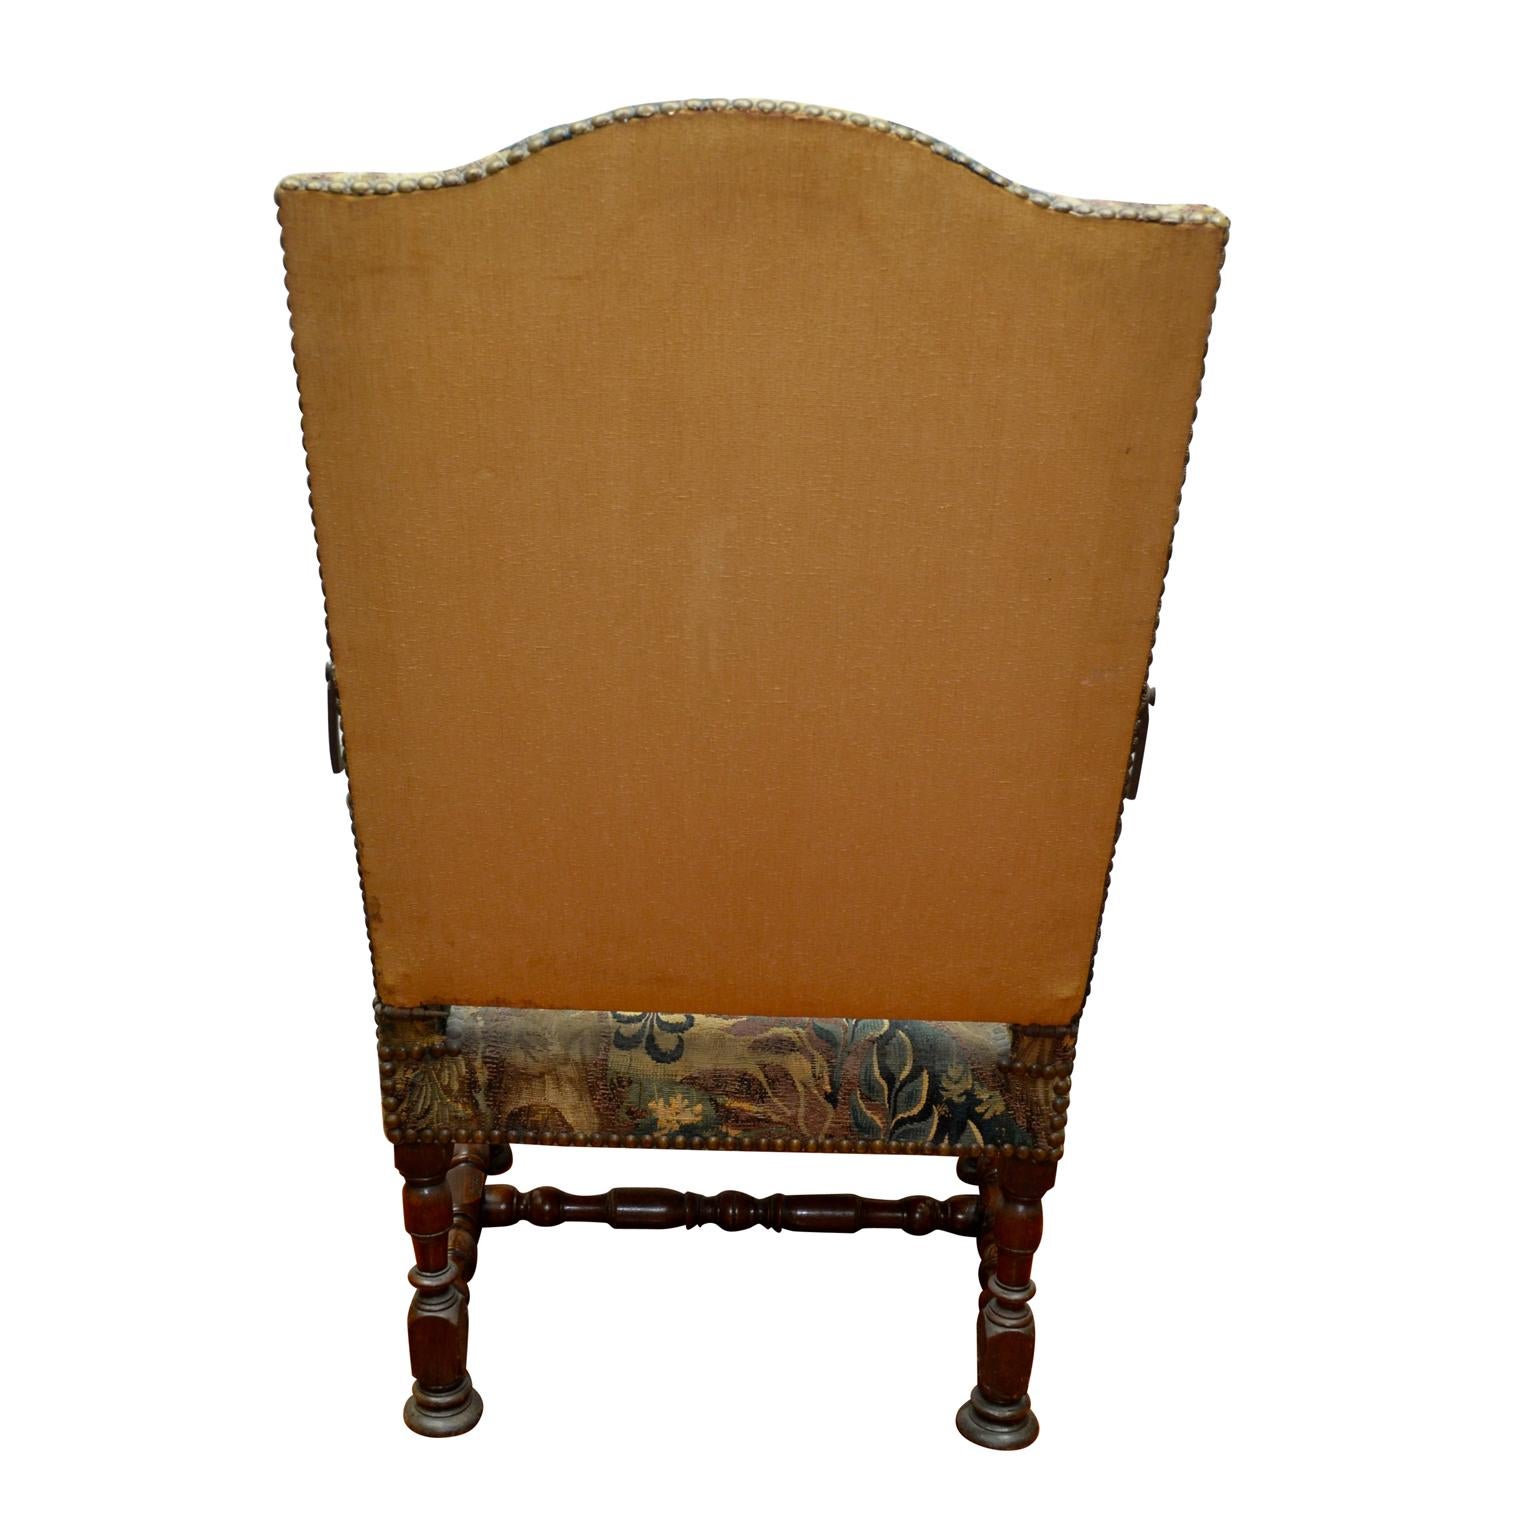 17th Century French Tapestry Reclining Armchair, a Veritable Medieval La-Z-boy For Sale